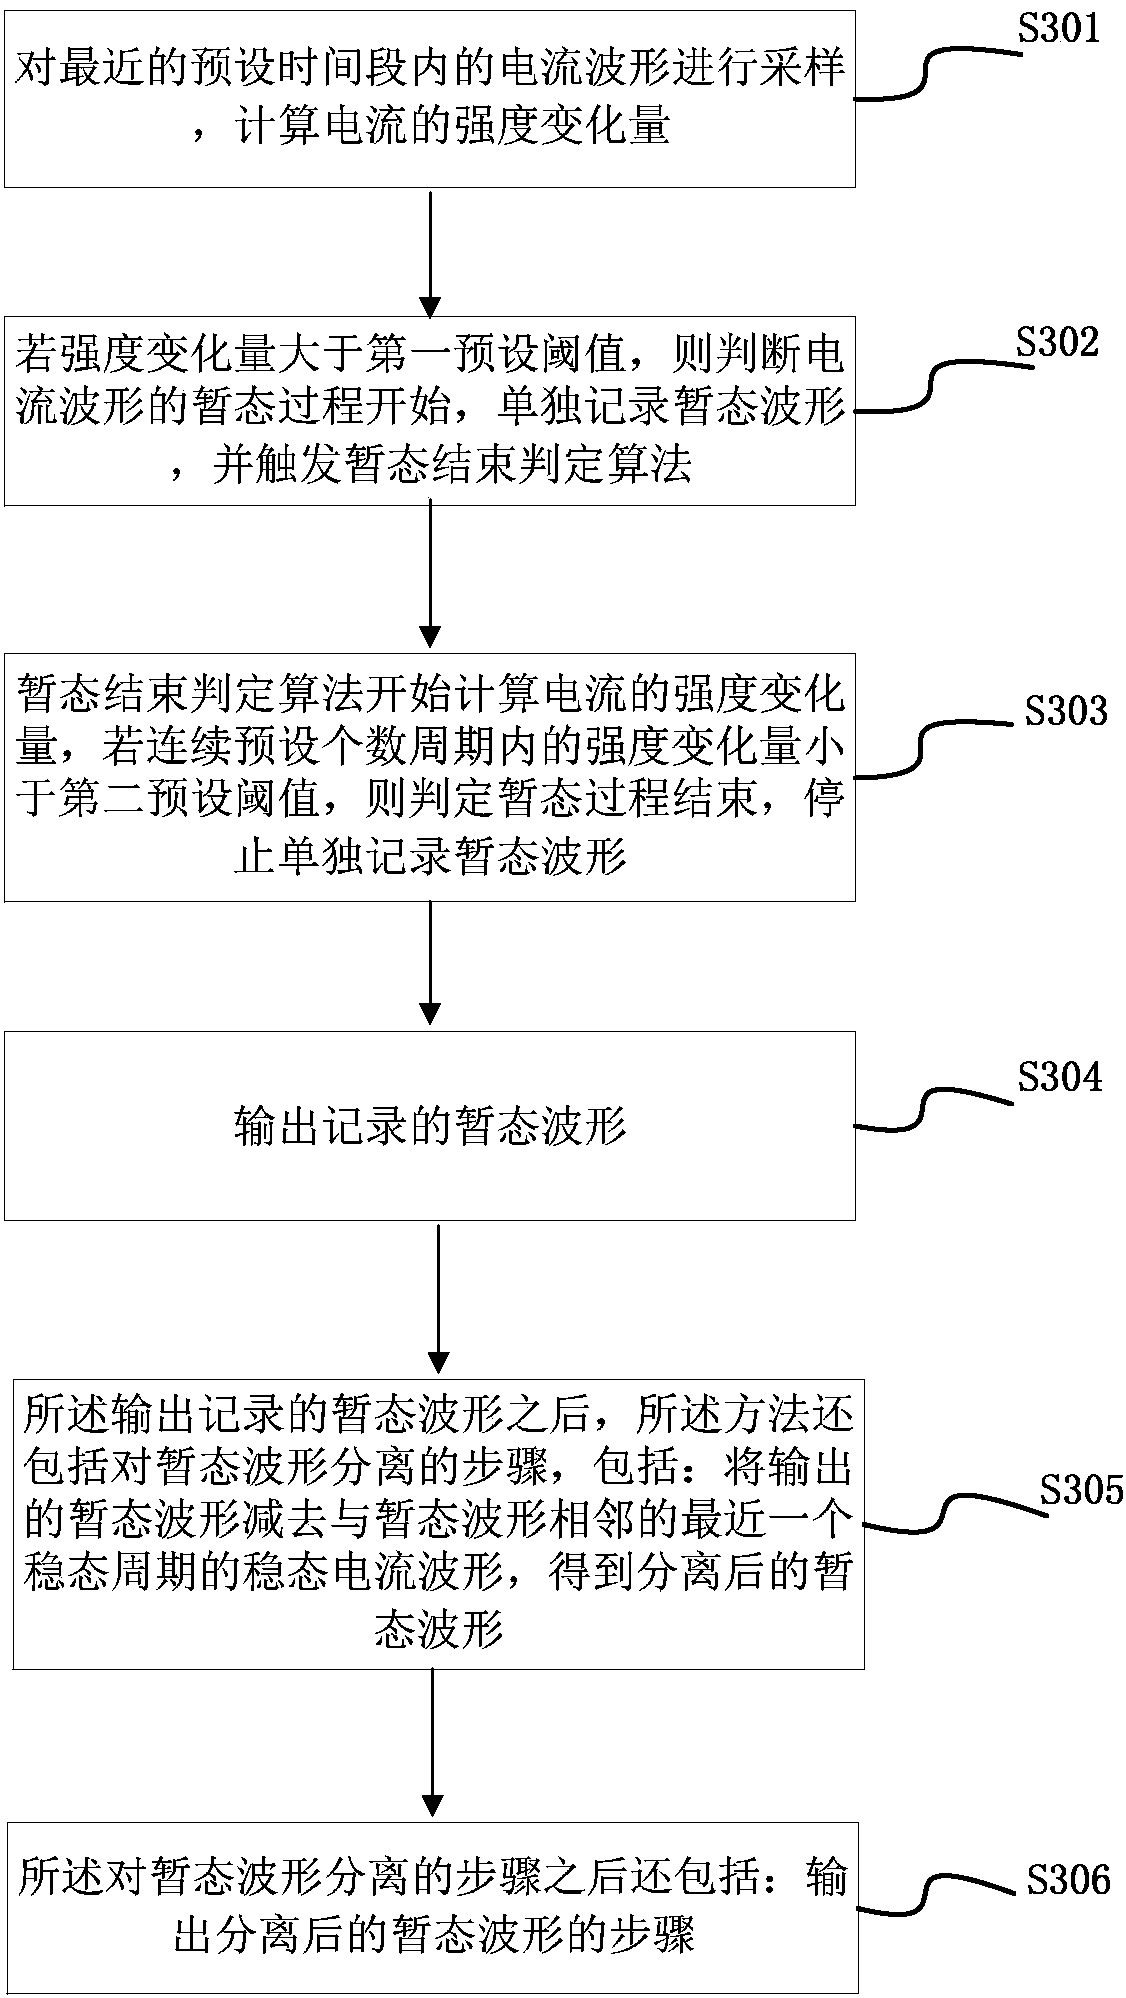 Transient process detection method, apparatus and system for railway power system